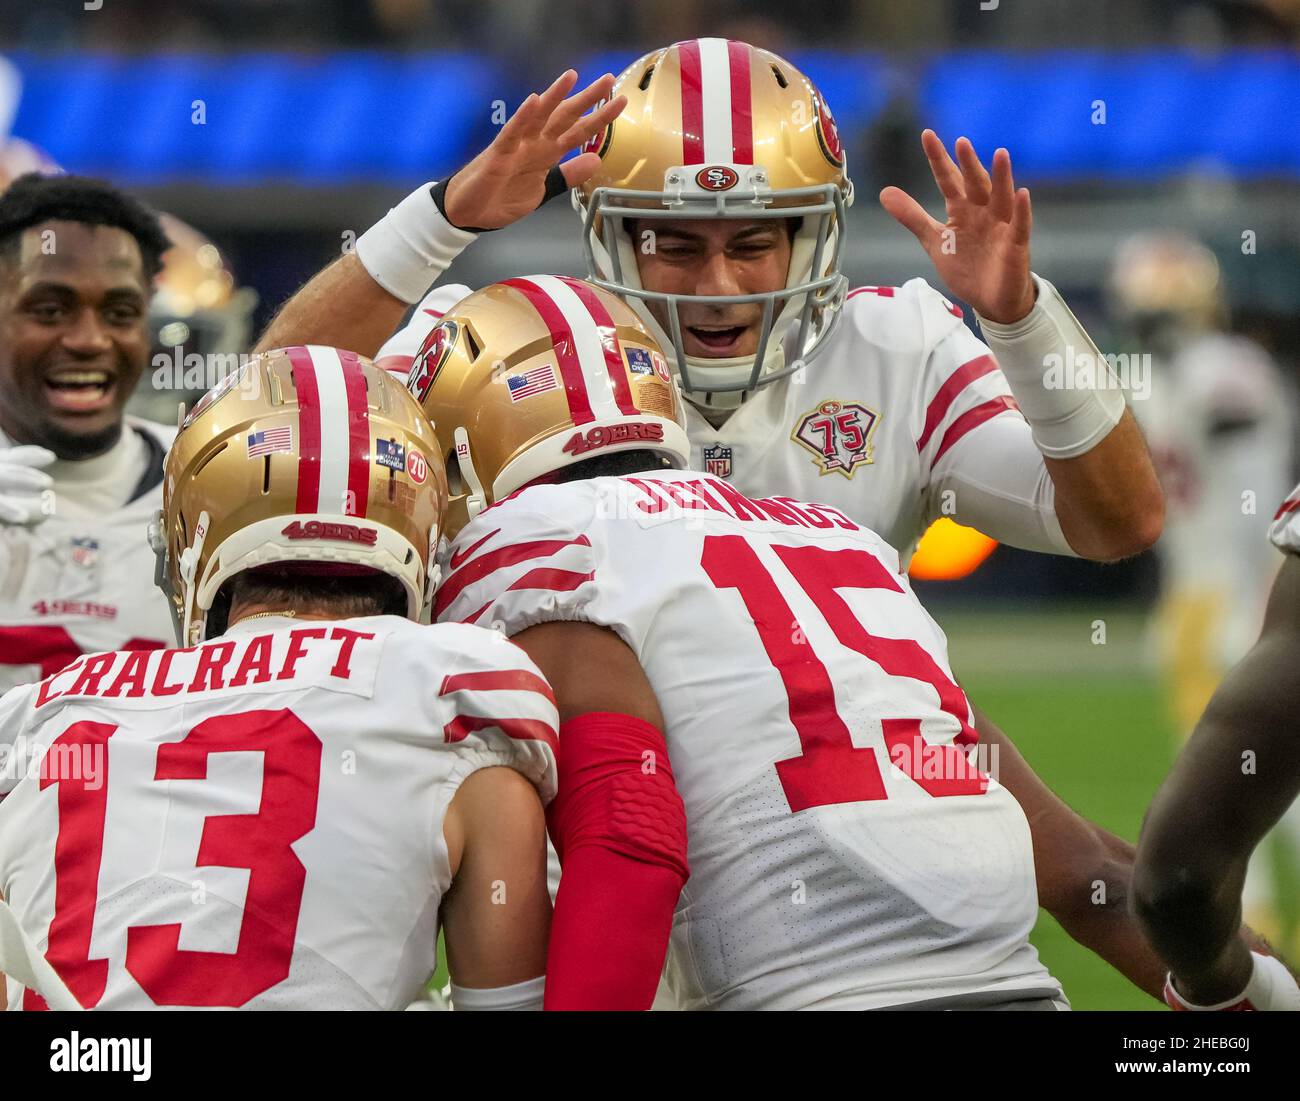 Inglewood, United States. 10th Jan, 2022. San Francisco 49ers Jimmy Garoppolo celebrates with teammates after second quarter touchdown against the Los Angeles Rams Sunday January 9, 2022 at SoFi Stadium in Inglewood, California. The Niners defeated the Rams 27-24. Photo by © Jon SooHoo/2022 Credit: UPI/Alamy Live News Stock Photo